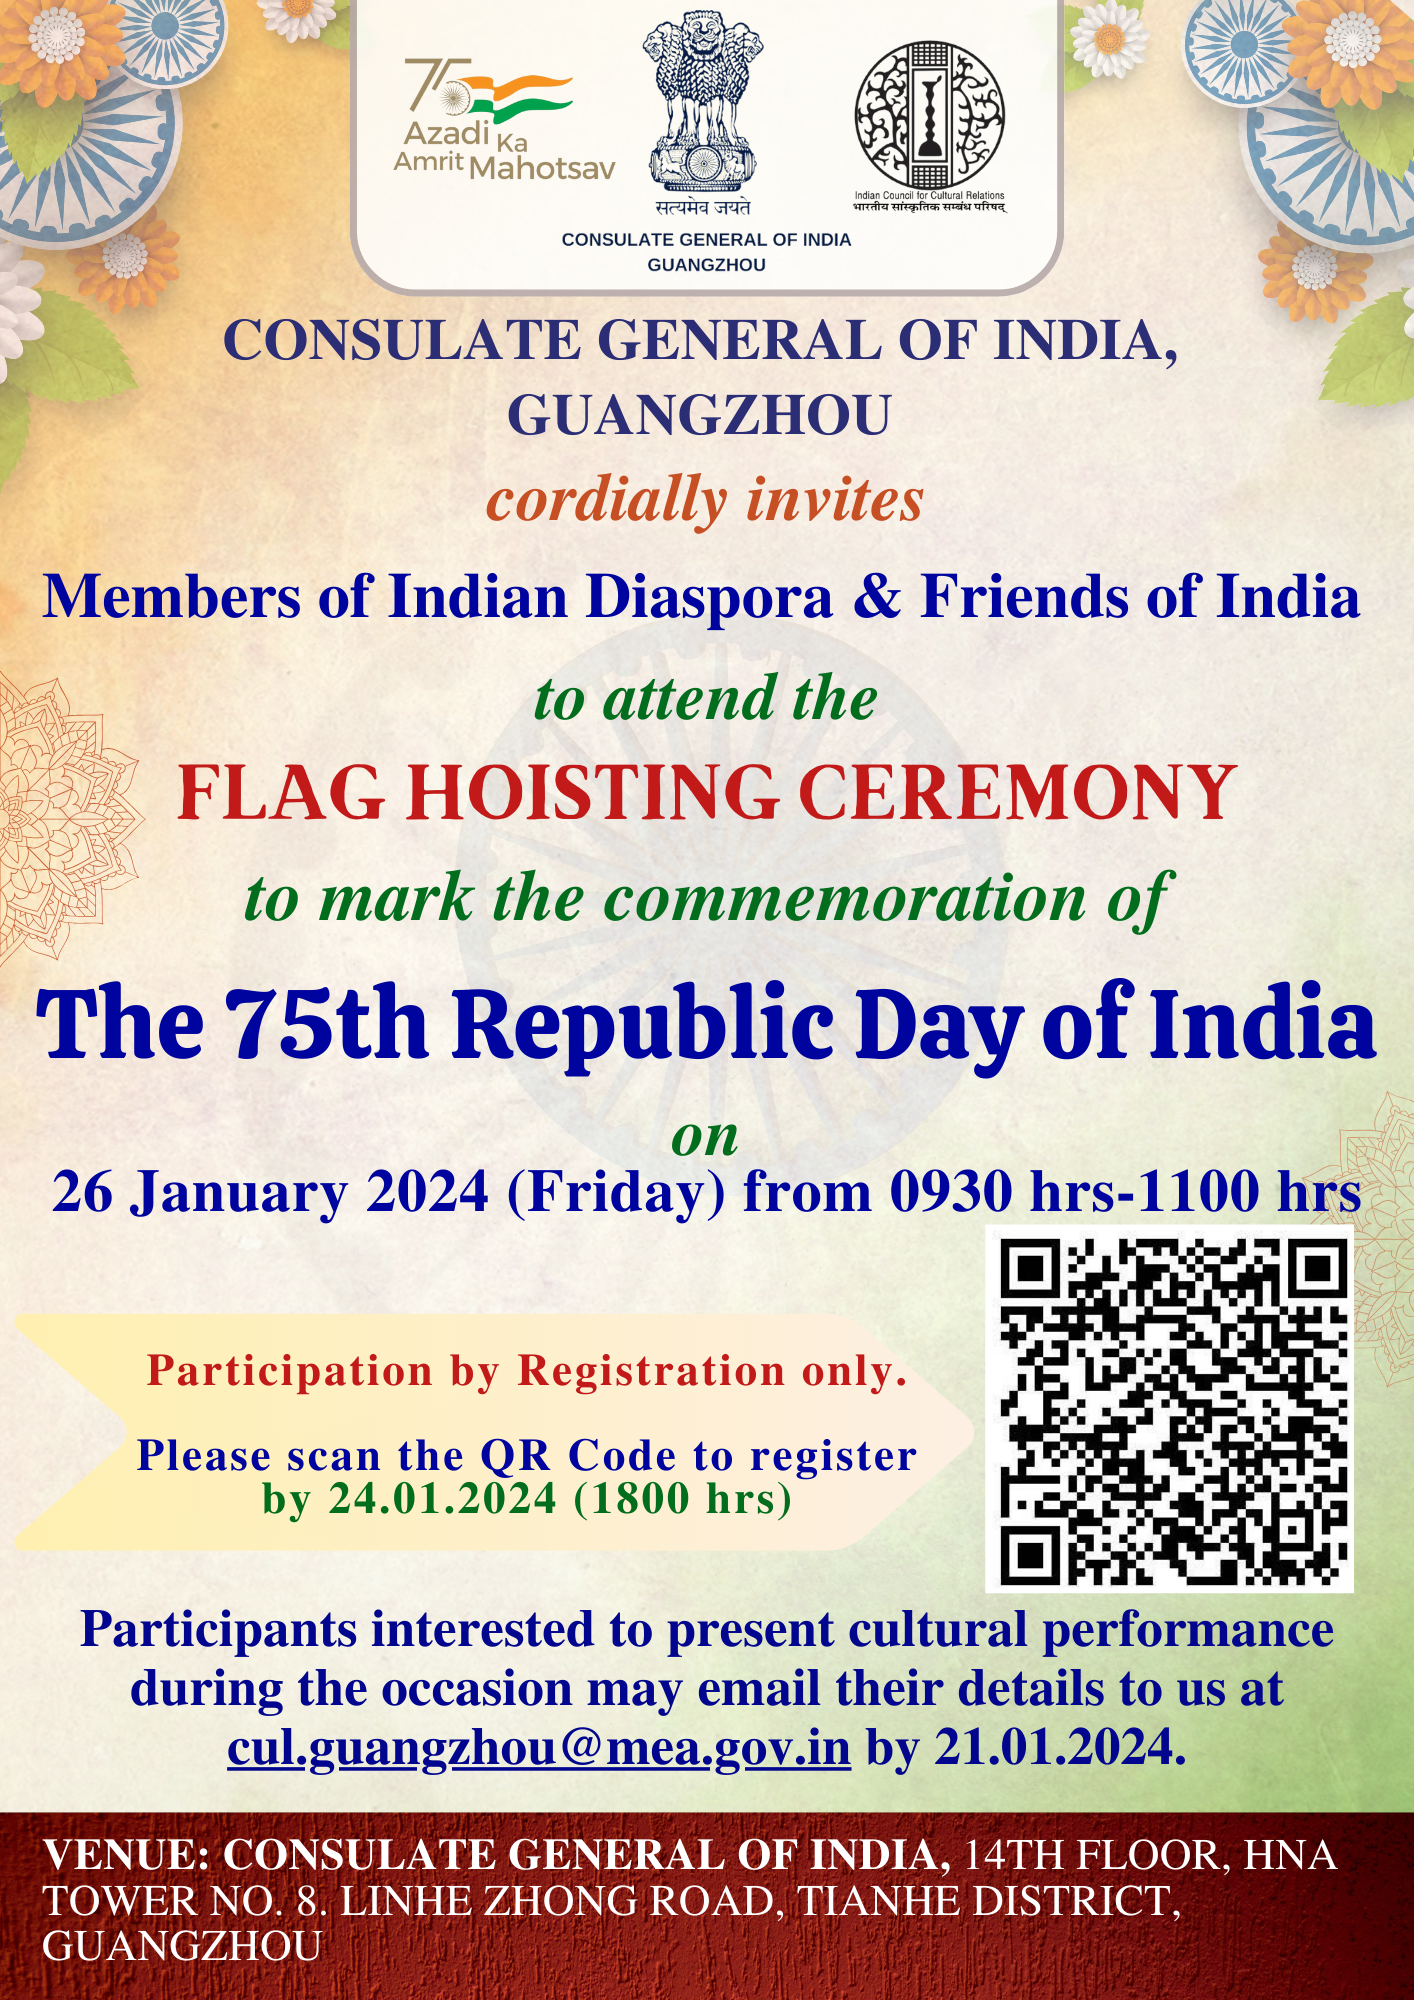  Invitation for Flag-Hoisting Ceremony to commemorate the 75th Republic Day of India on 26 January 2024.